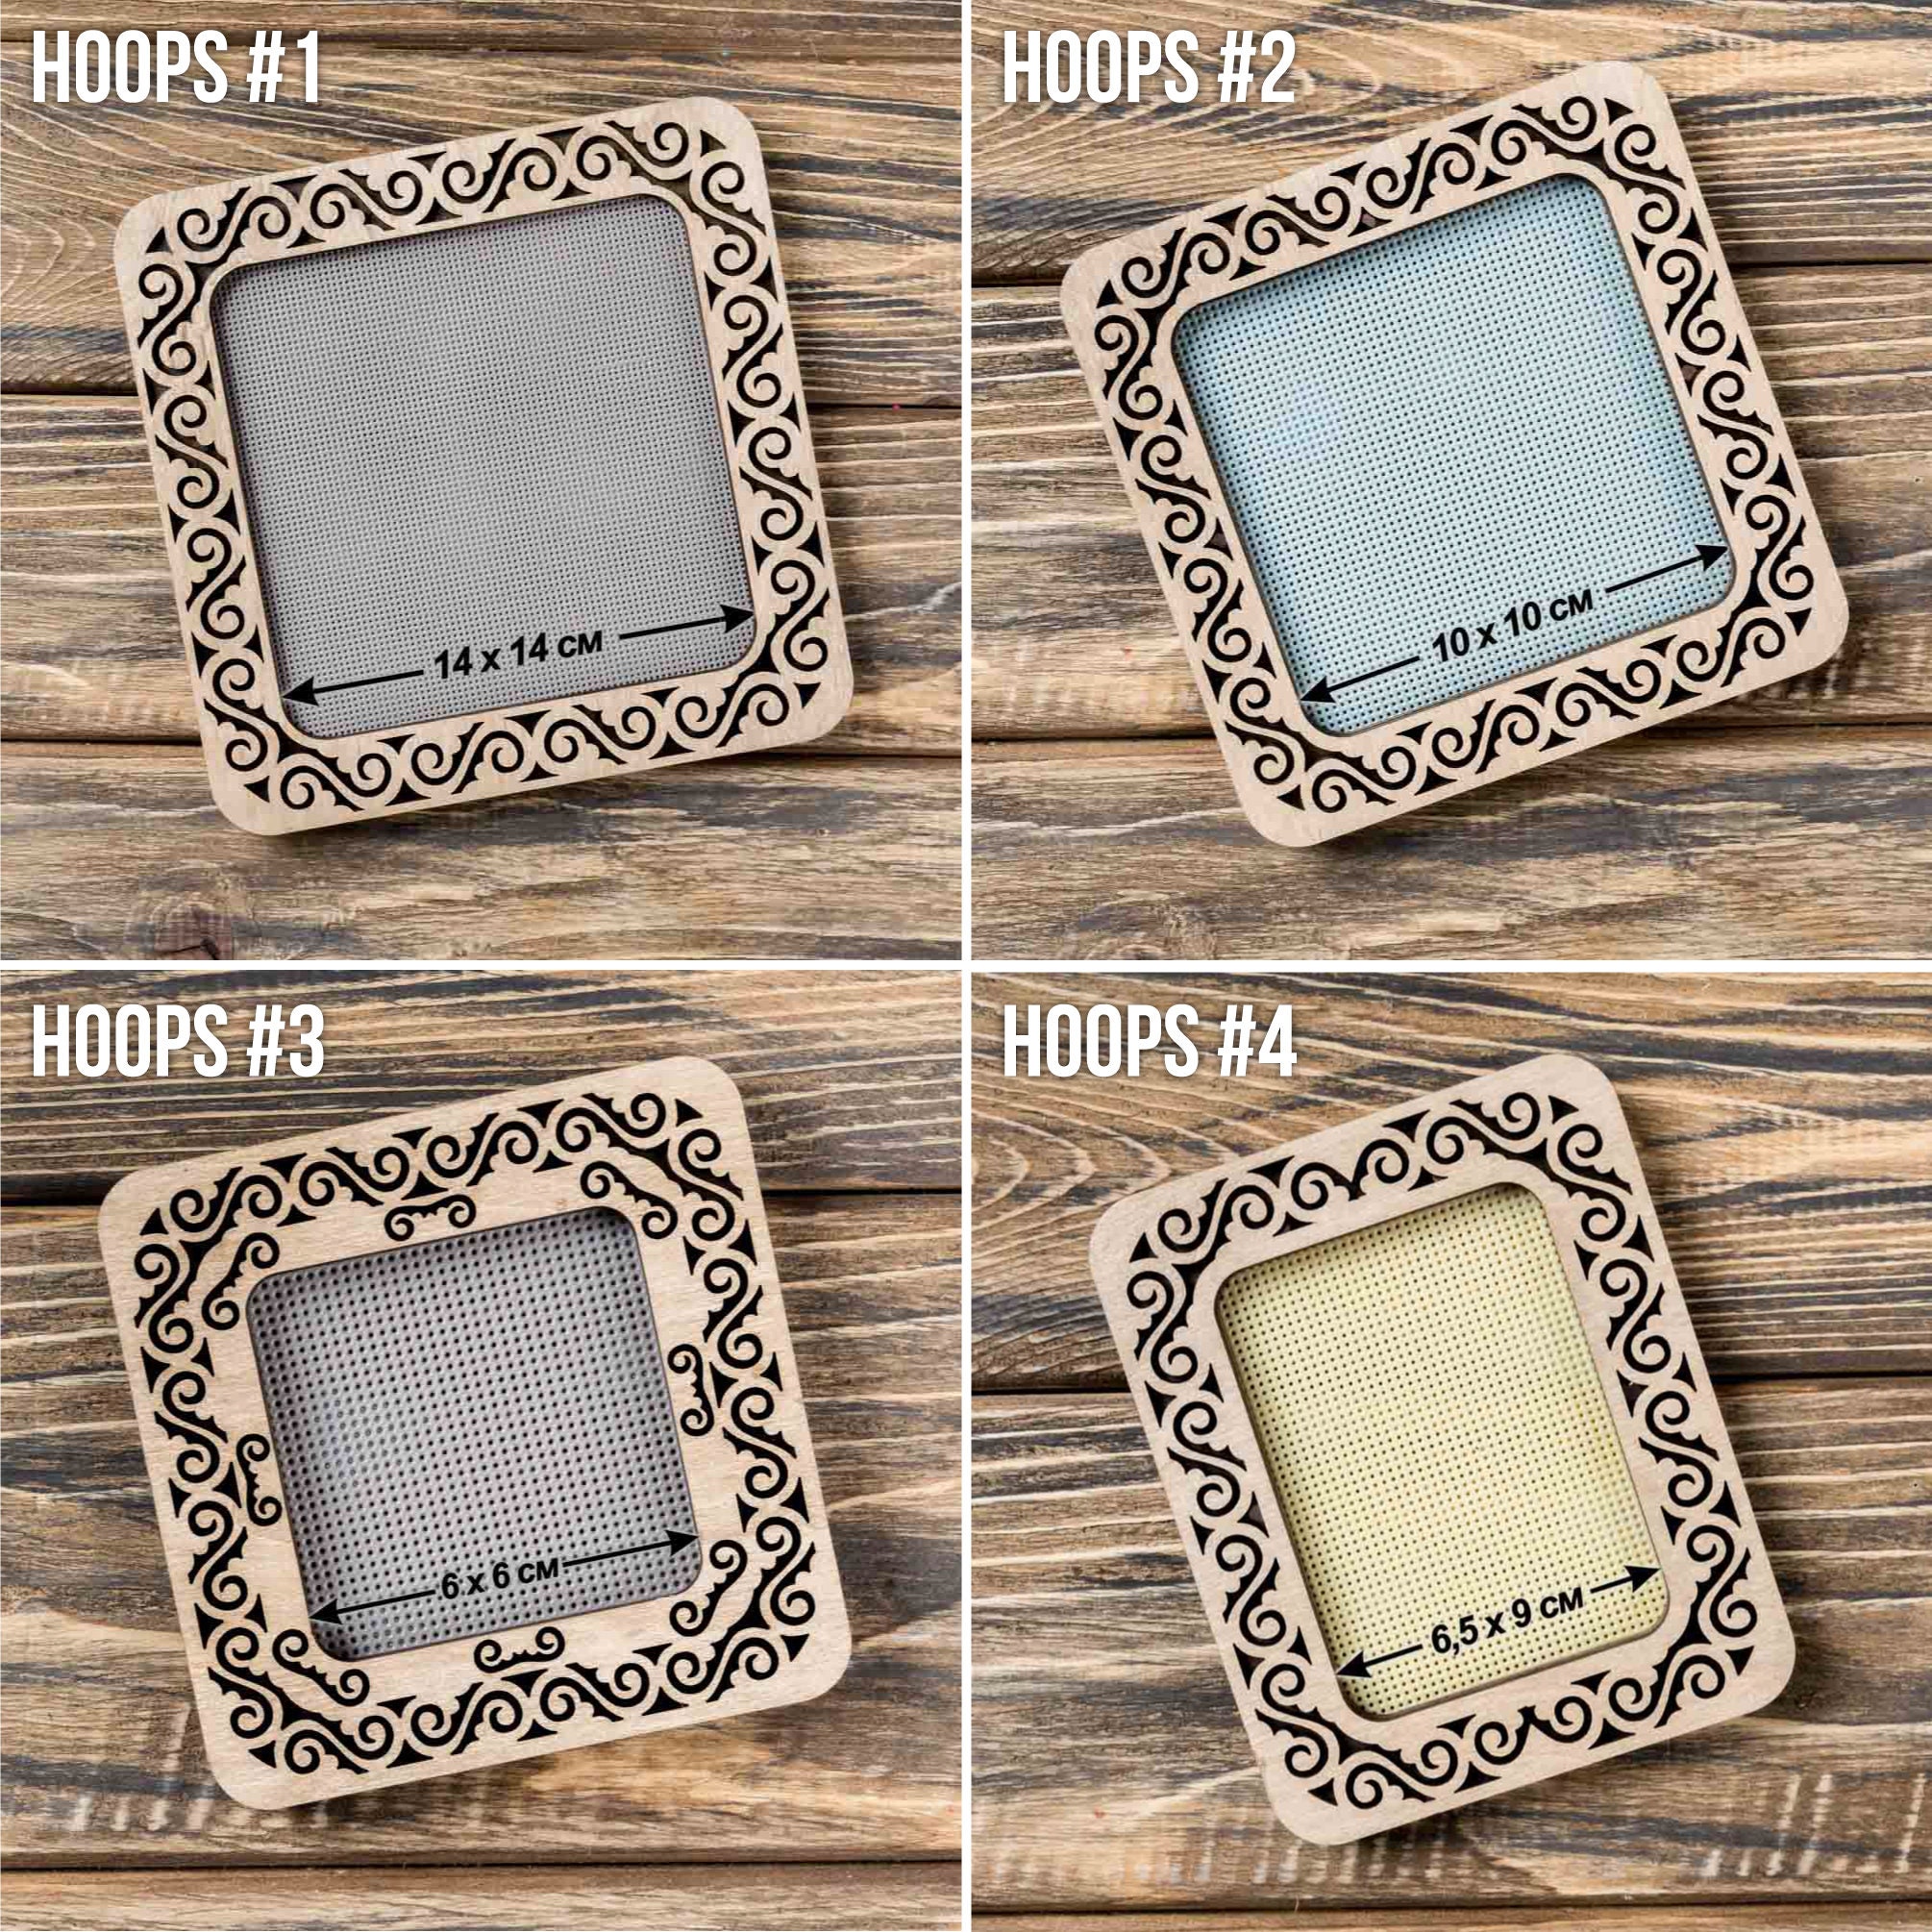 Wooden Embroidery Hoop Ring Square Frame For Cross Stitch Craft Set Of 2  Pieces